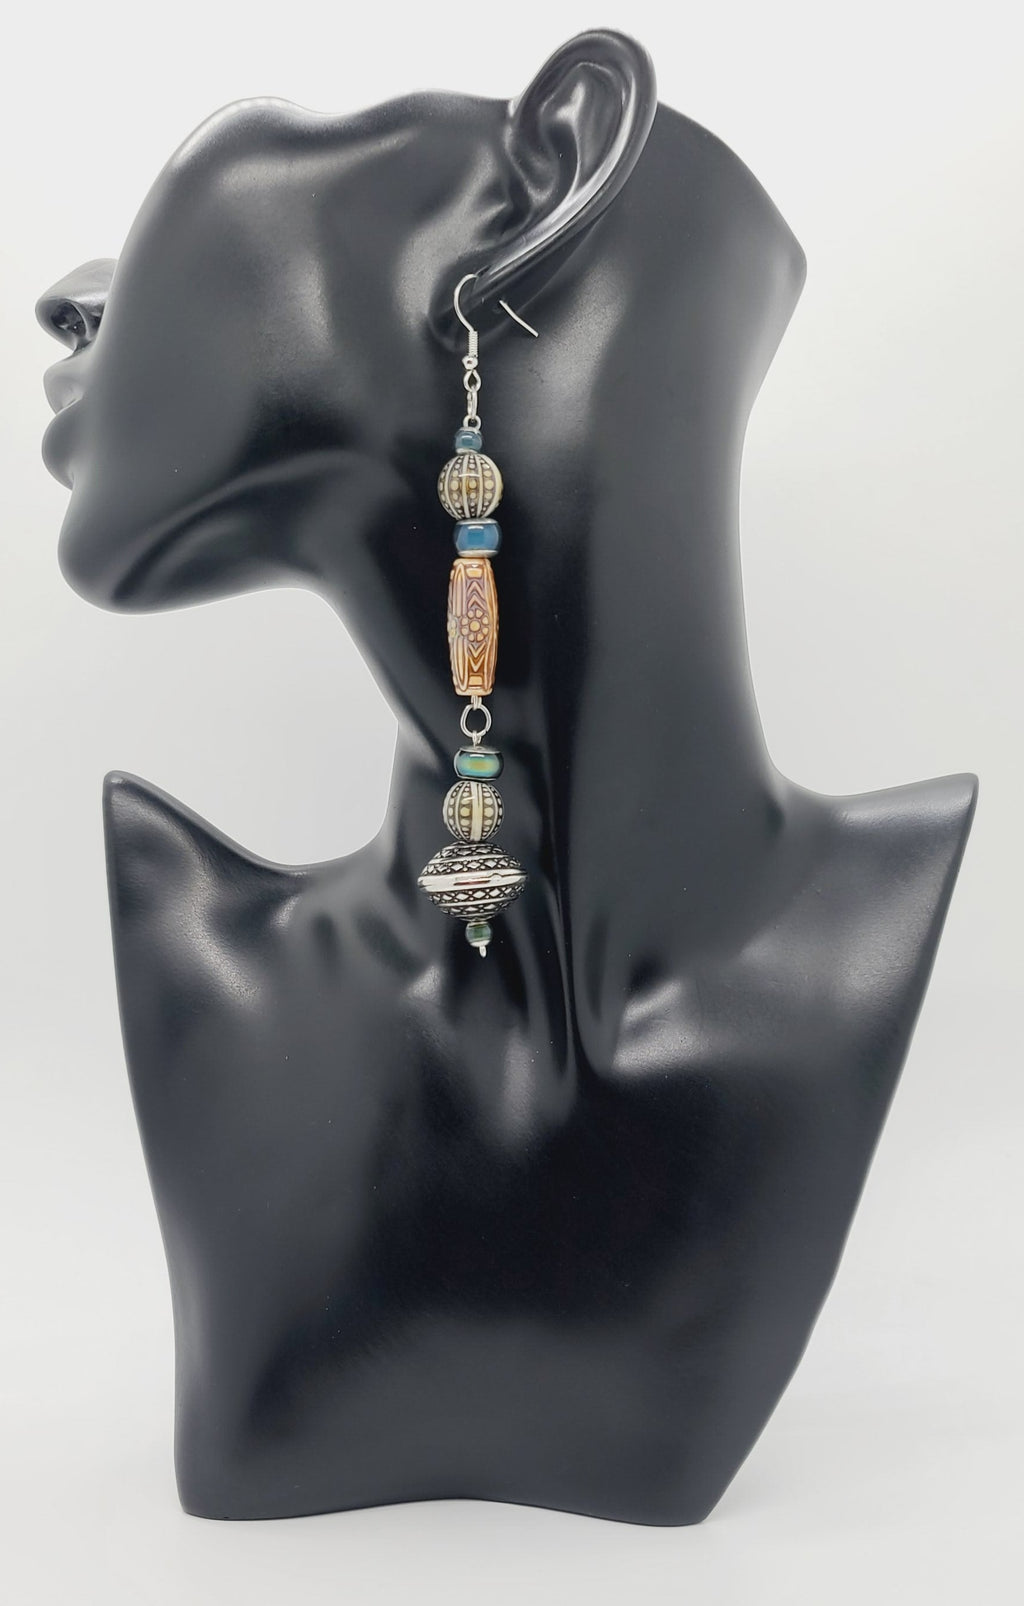 Length: 5 inches | Weight: 0.8 ounces  Distinctly You! These earrings are made with engraved silver Bicone charms, amber printed wood resin covered beads, 10mm grey and ivory printed resin beads, 3mm and 6mm green resin beads.